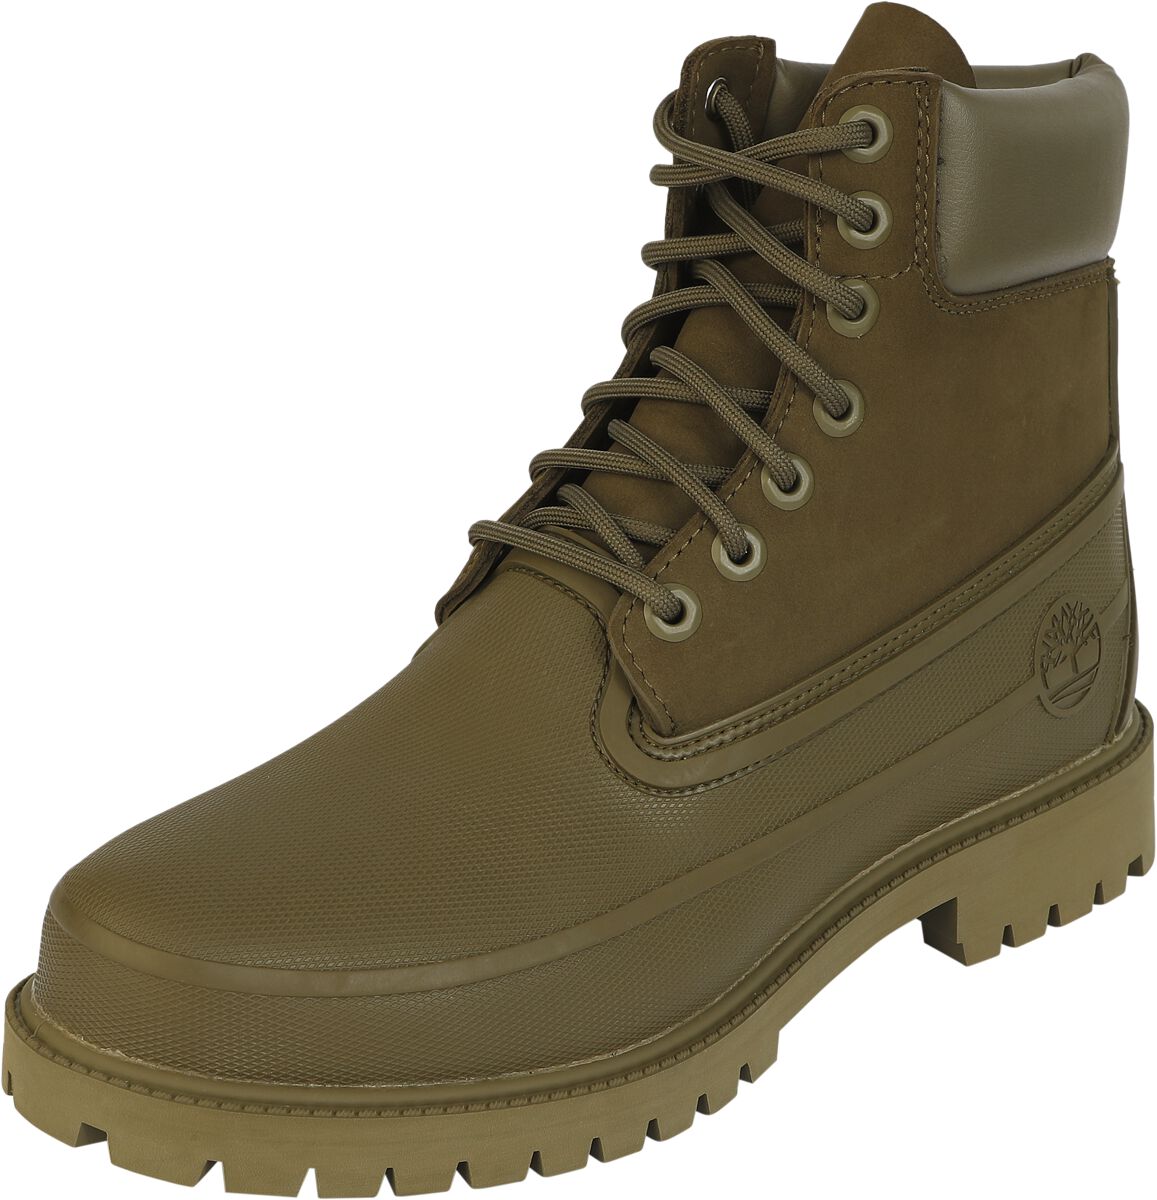 Timberland Rubber Toe 6 Inch Remix Boot oliv in EU45 von Timberland